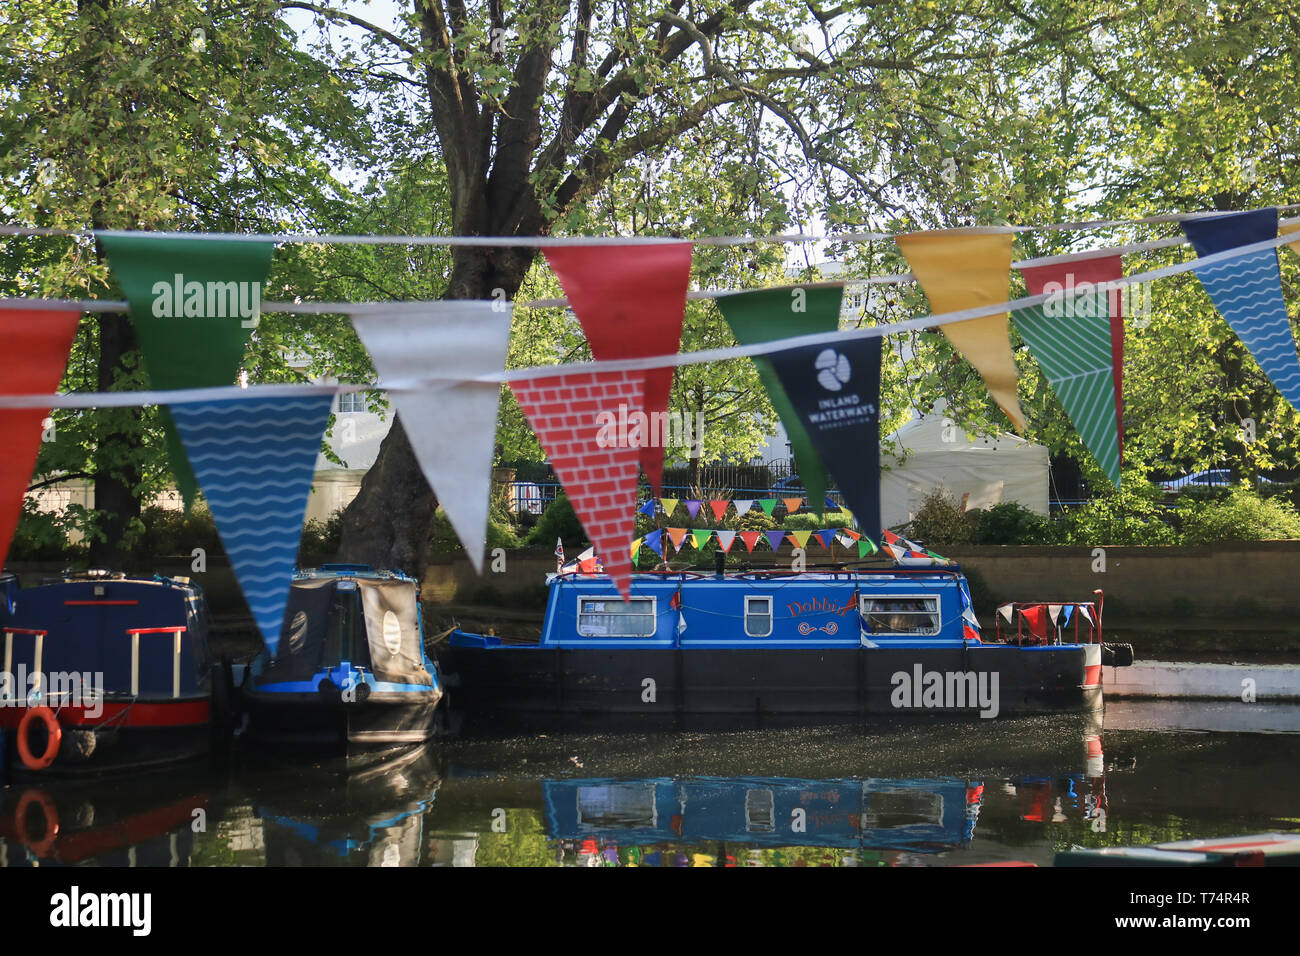 London, UK. 4th May, 2019. Colourful bunting on Canal barges at the start of The Inland Waterways Association's annual pageant of canal boats at the Canalway Cavalcade festival in Little Venice, West London on May bank holiday weekend. Credit: amer ghazzal/Alamy Live News Stock Photo